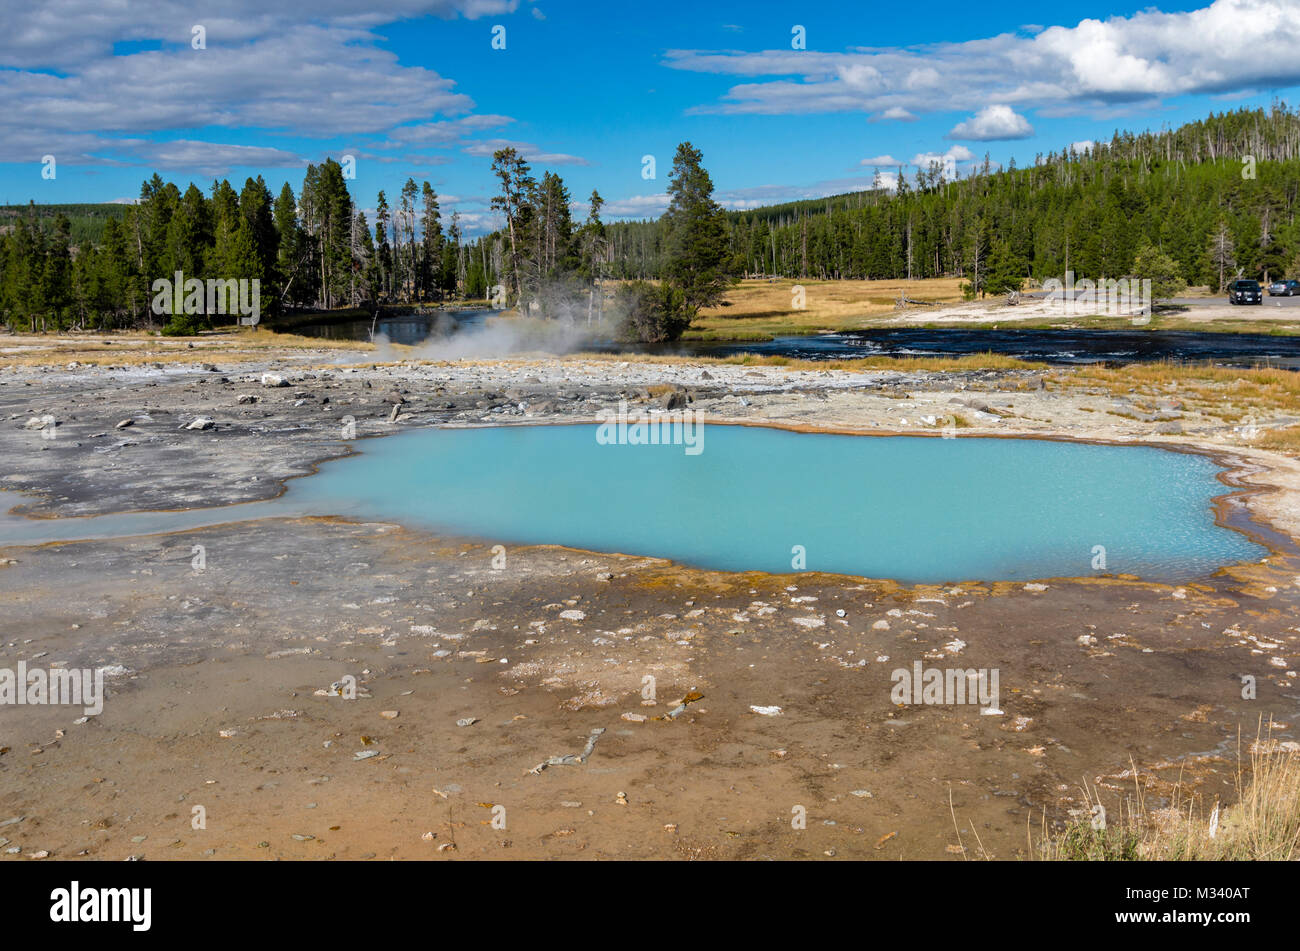 Black Opal Pool in Biscuit Basin. Yellowstone National Park, Wyoming, USA Stockfoto